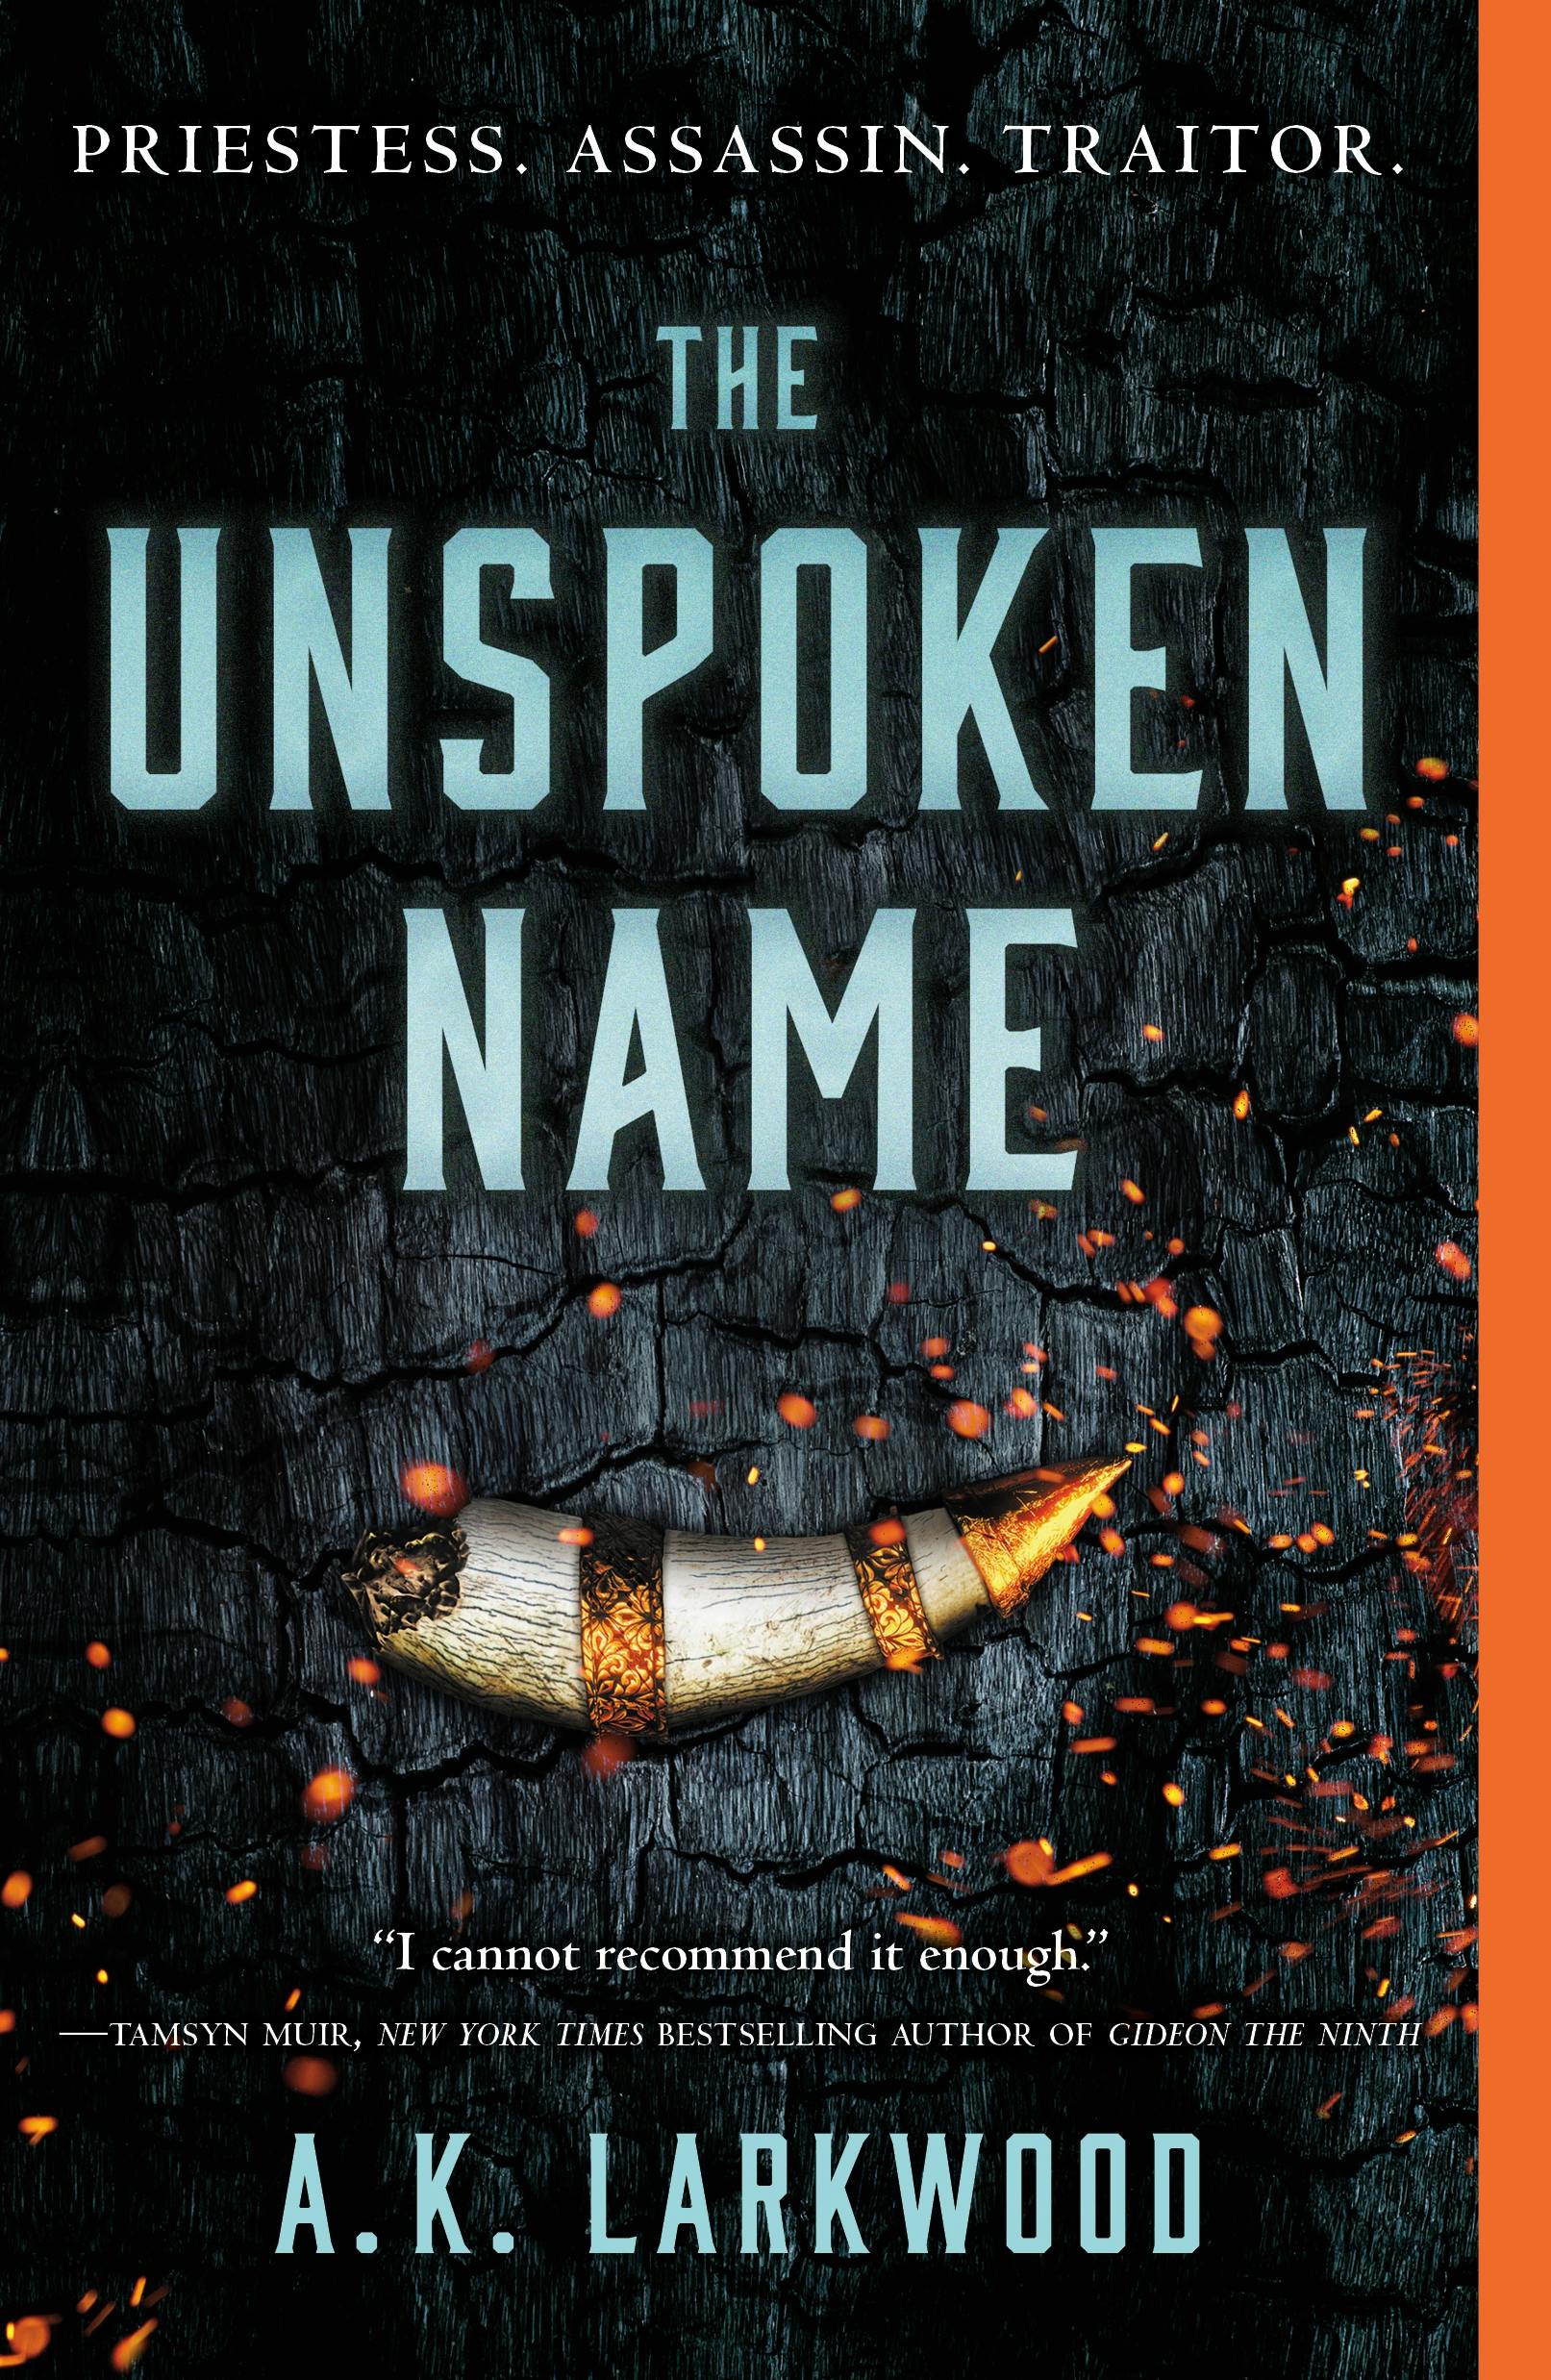 Image of The Unspoken Name